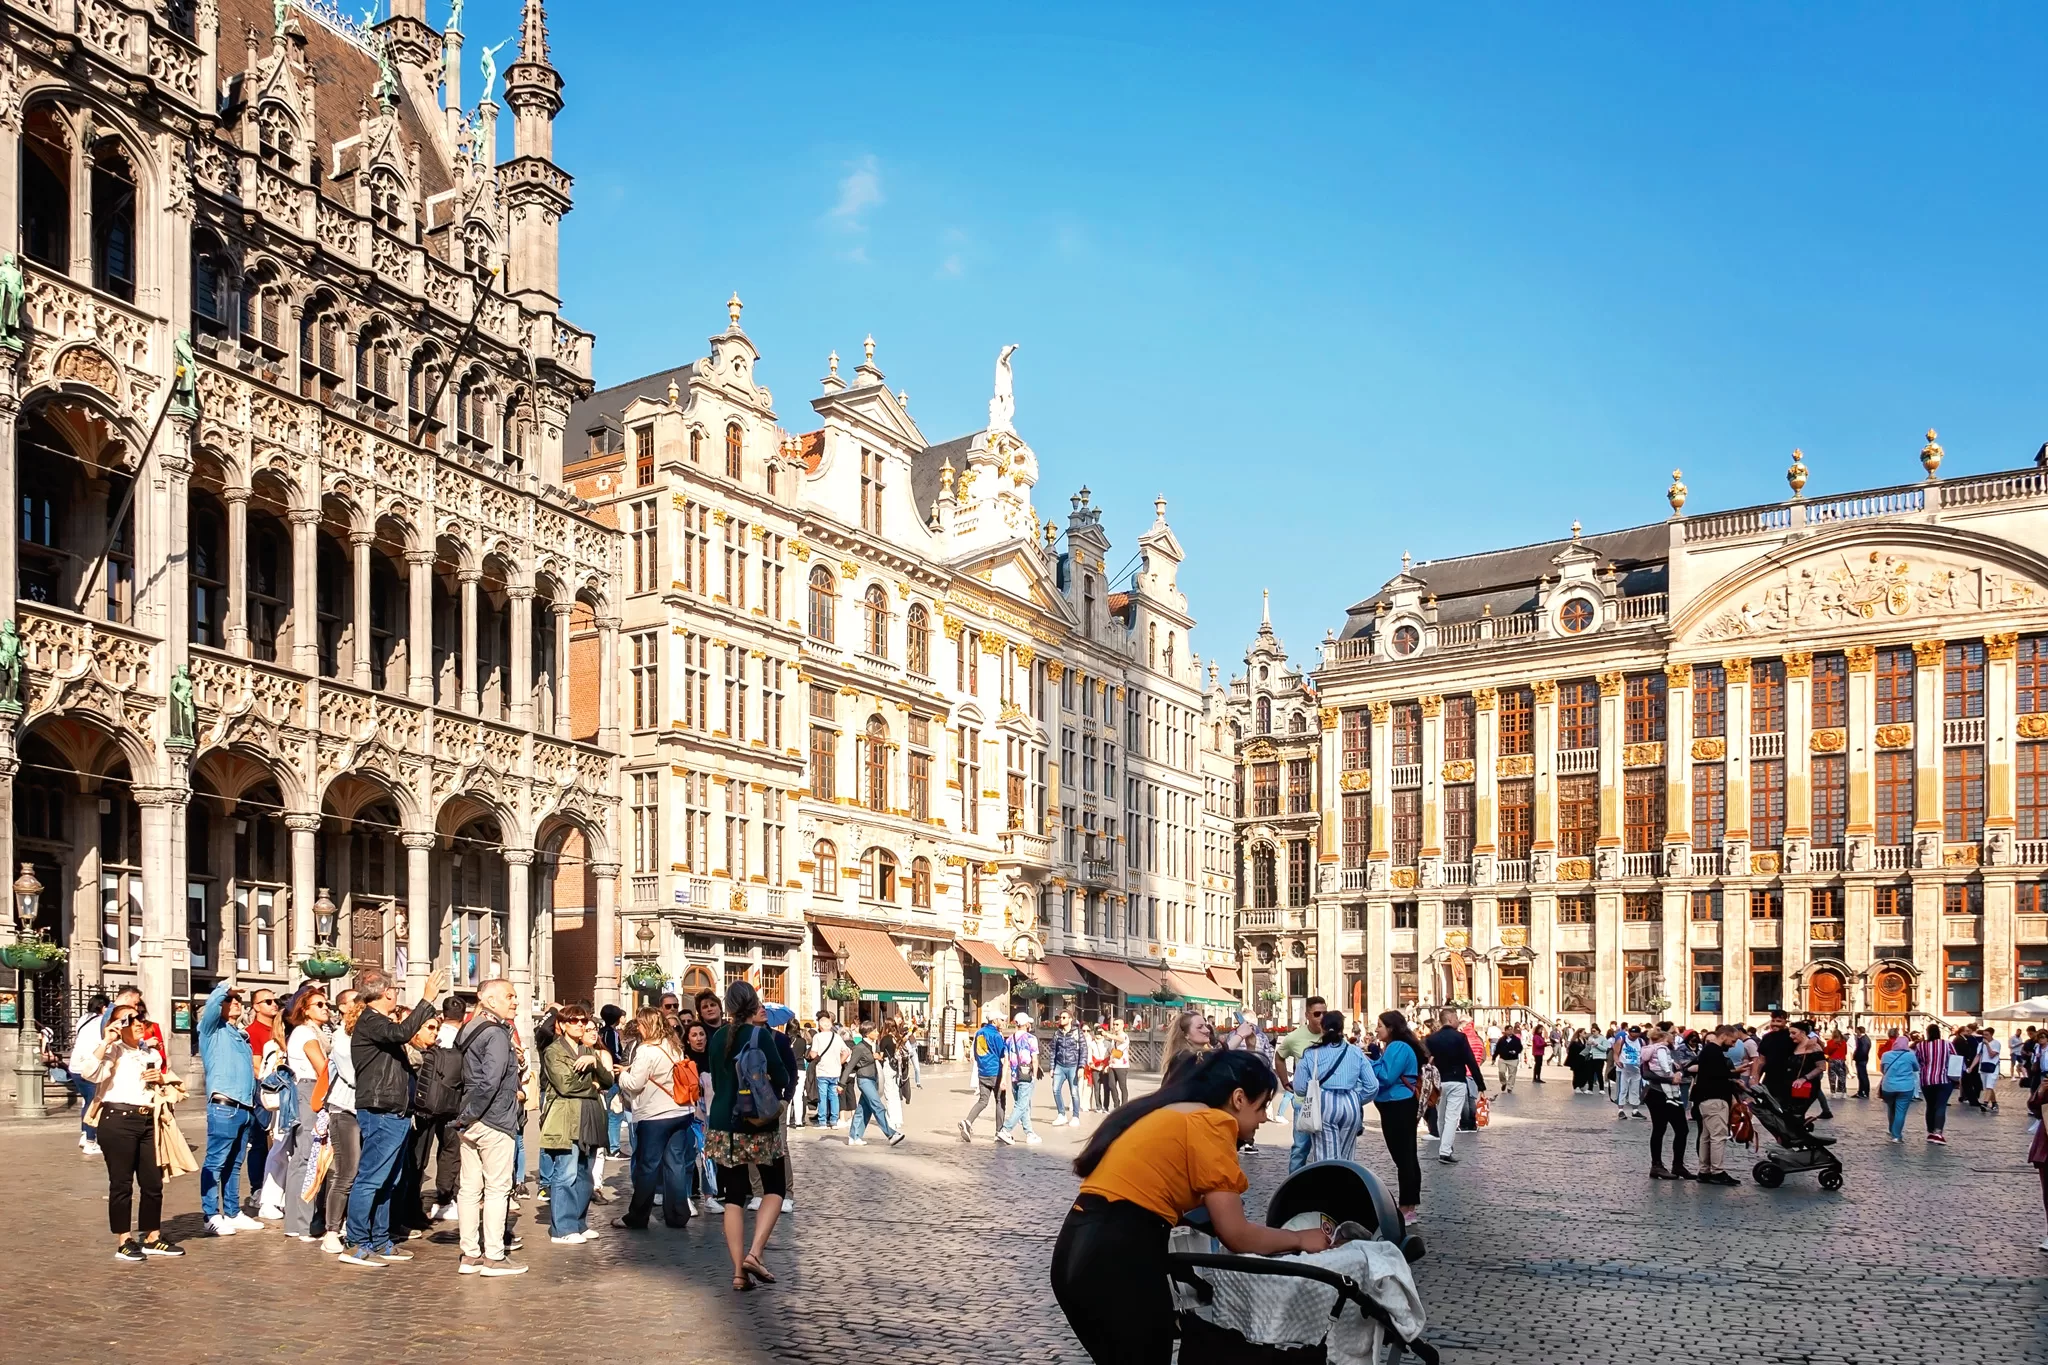 This image was taken during a weekend in Brussels.  You can see people strolling around Grand Place